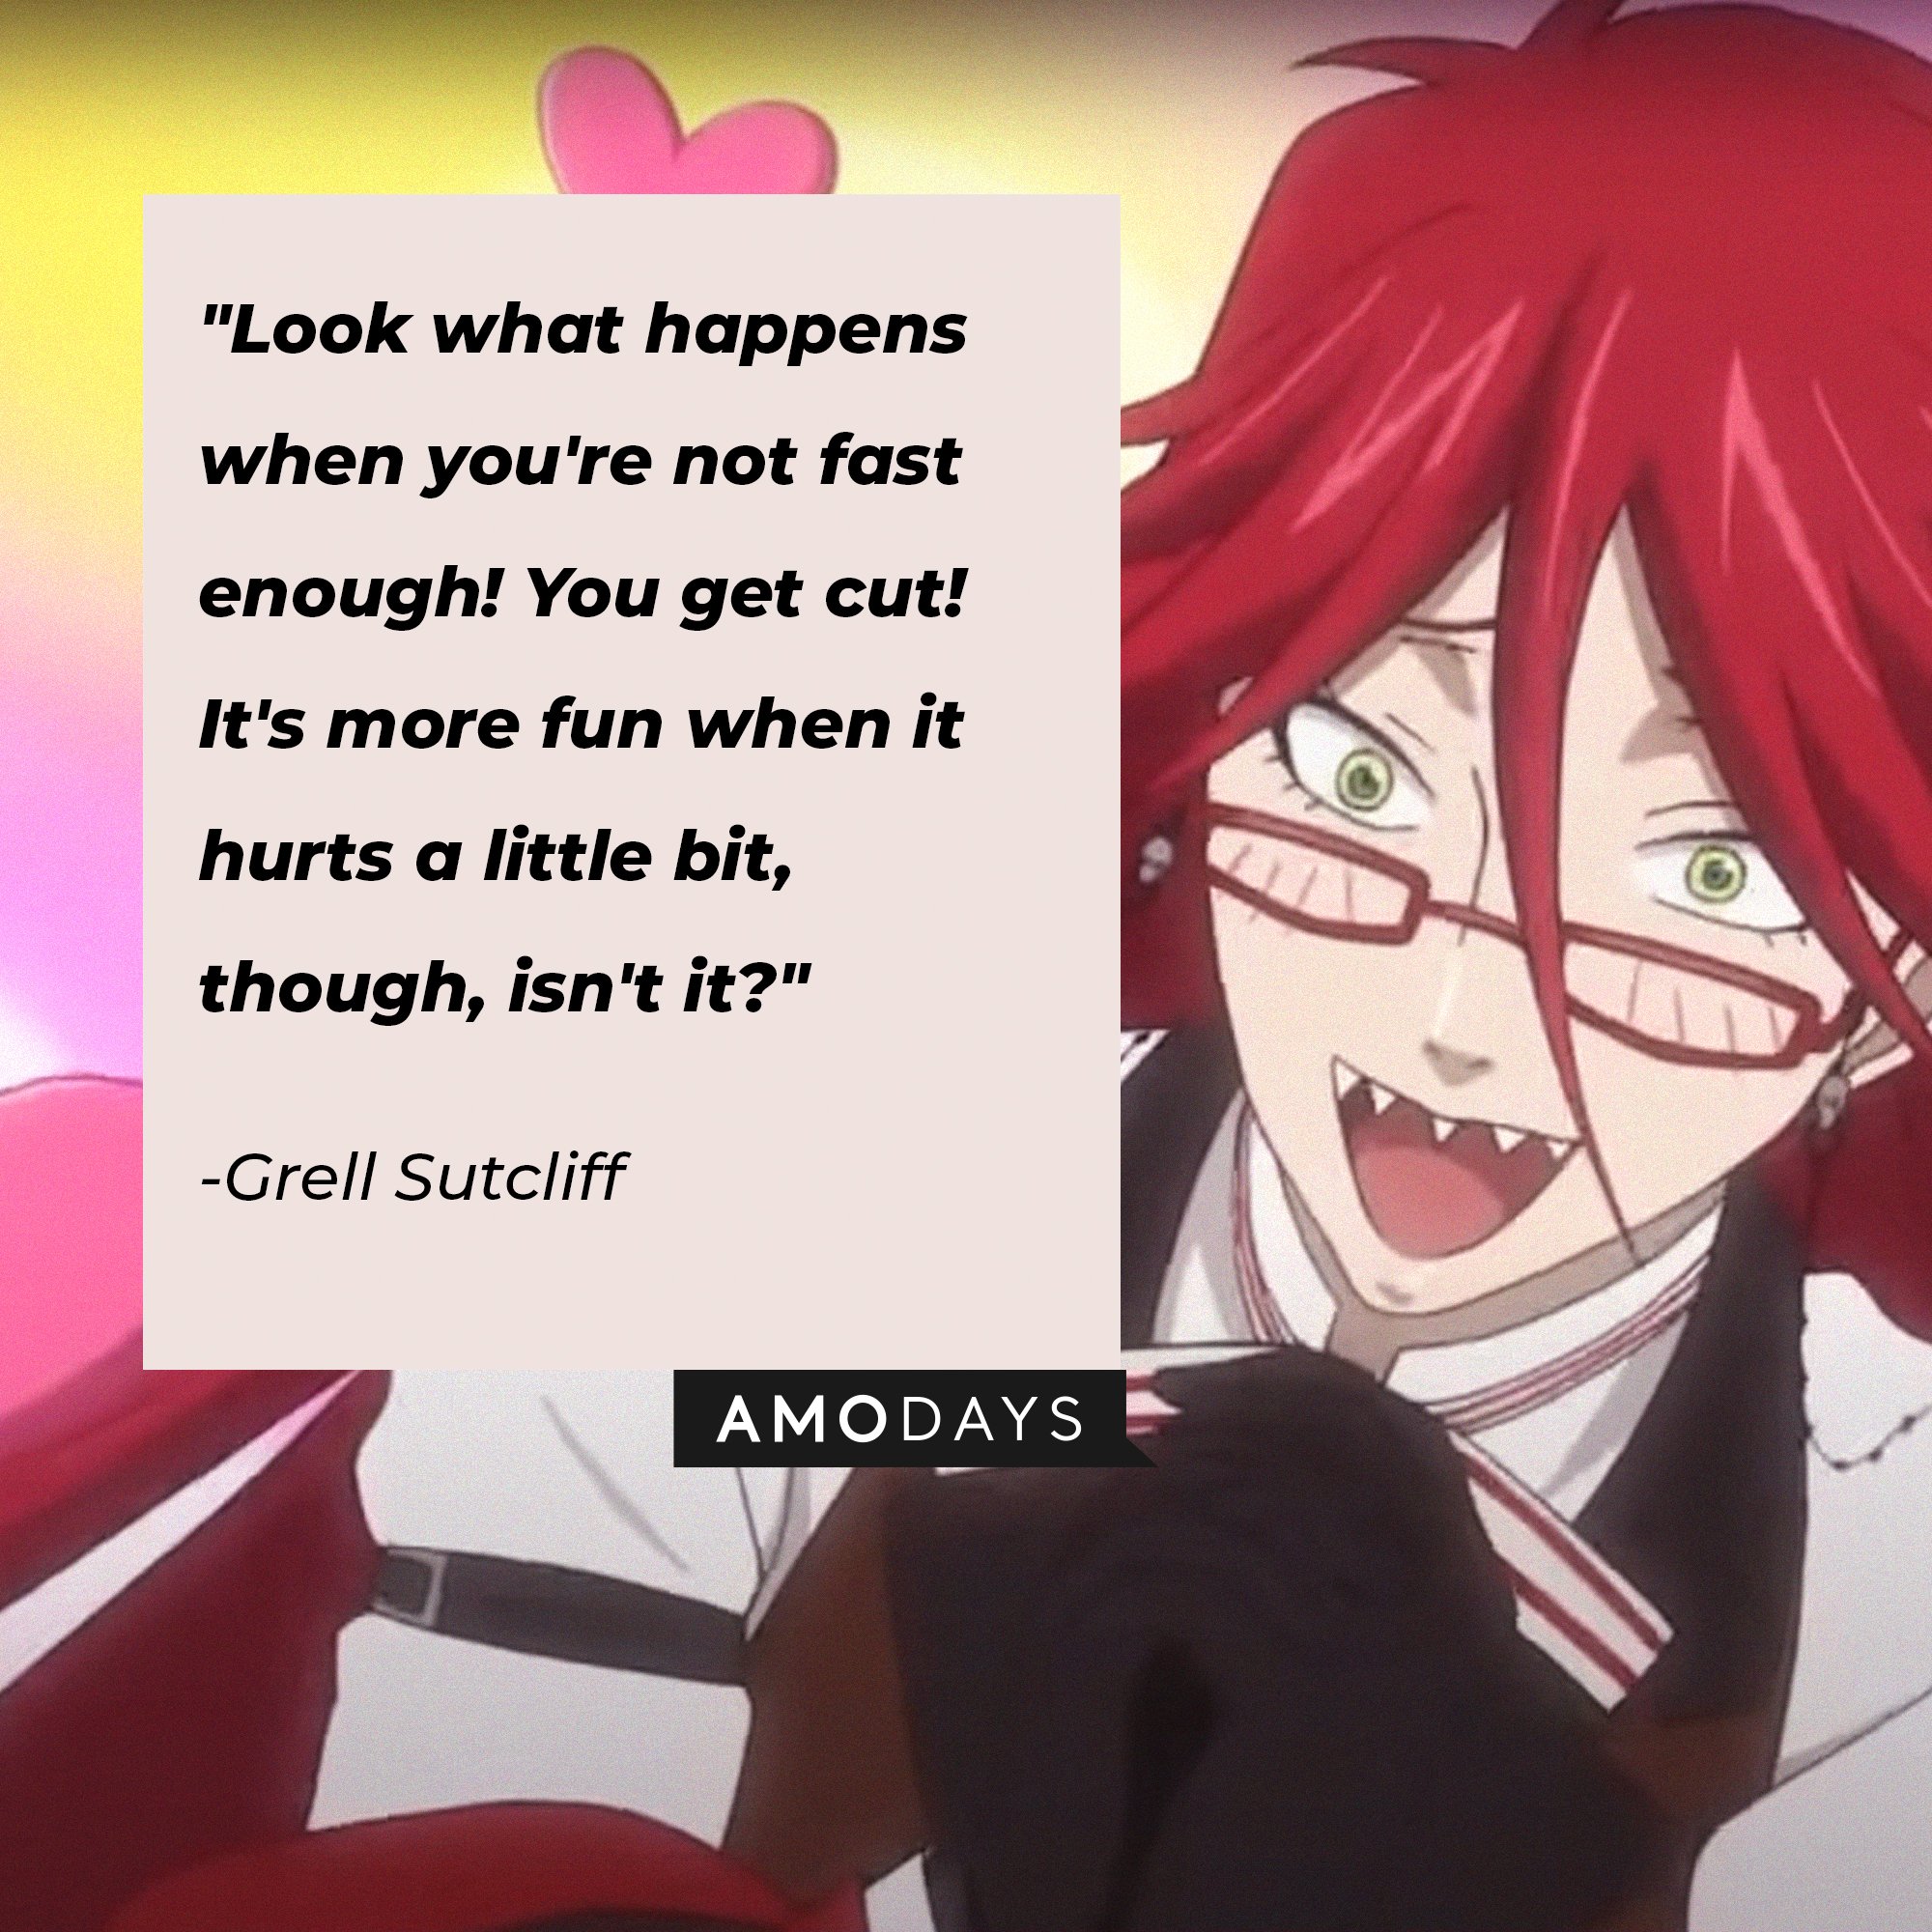 Grell Sutcliff’s quote: "Look what happens when you're not fast enough! You get cut! It's more fun when it hurts a little bit, though, isn't it?" | Image: AmoDays